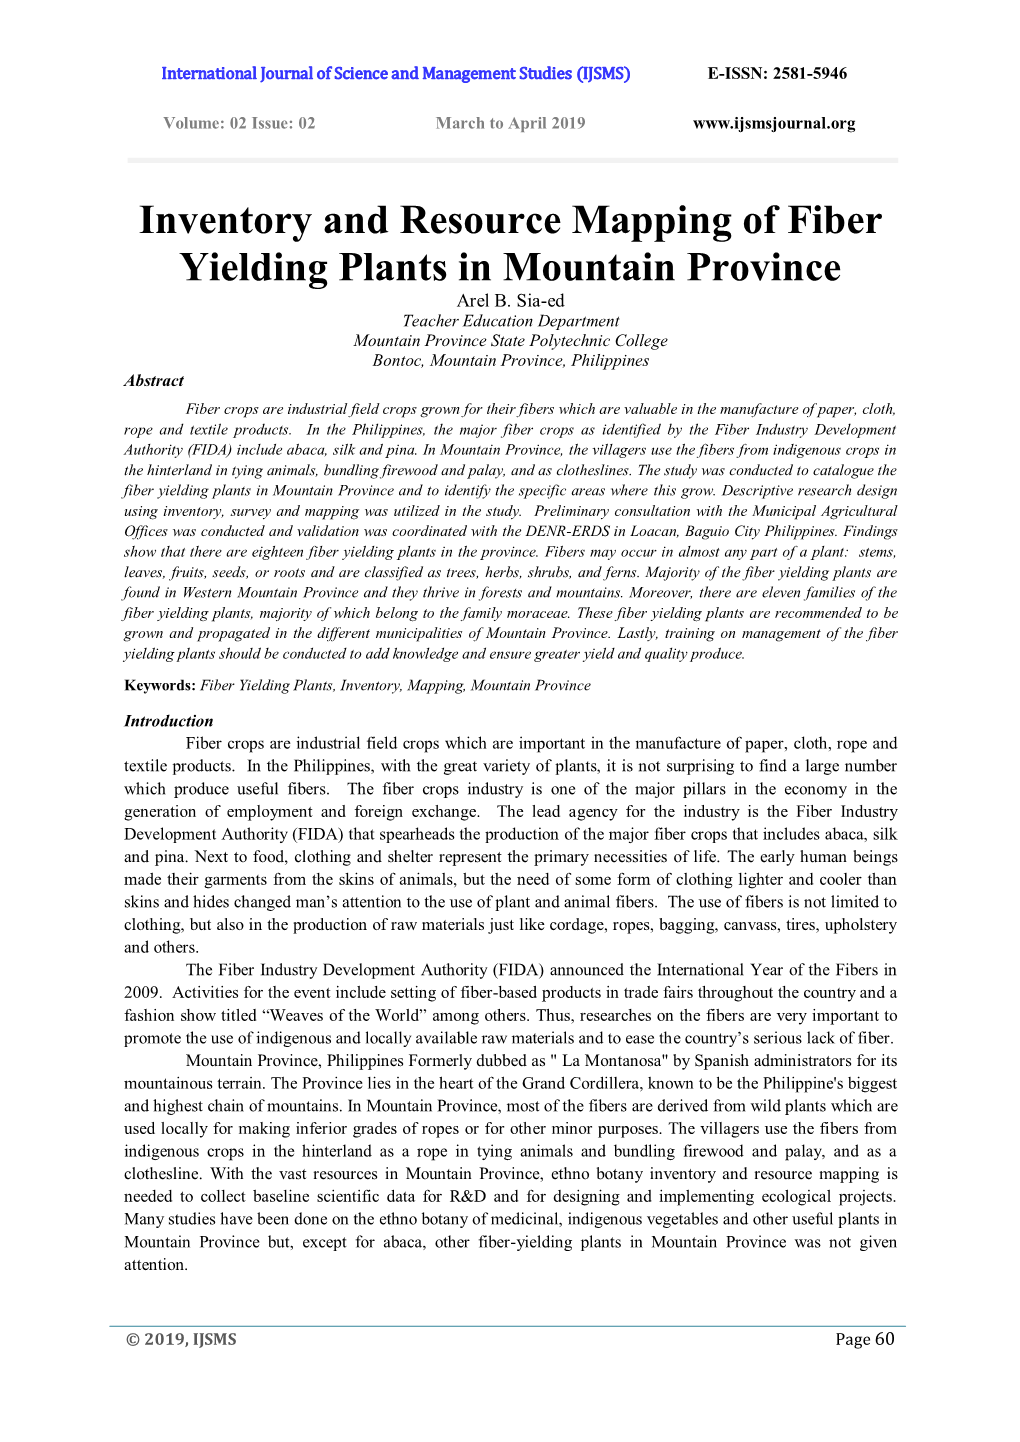 Inventory and Resource Mapping of Fiber Yielding Plants in Mountain Province Arel B